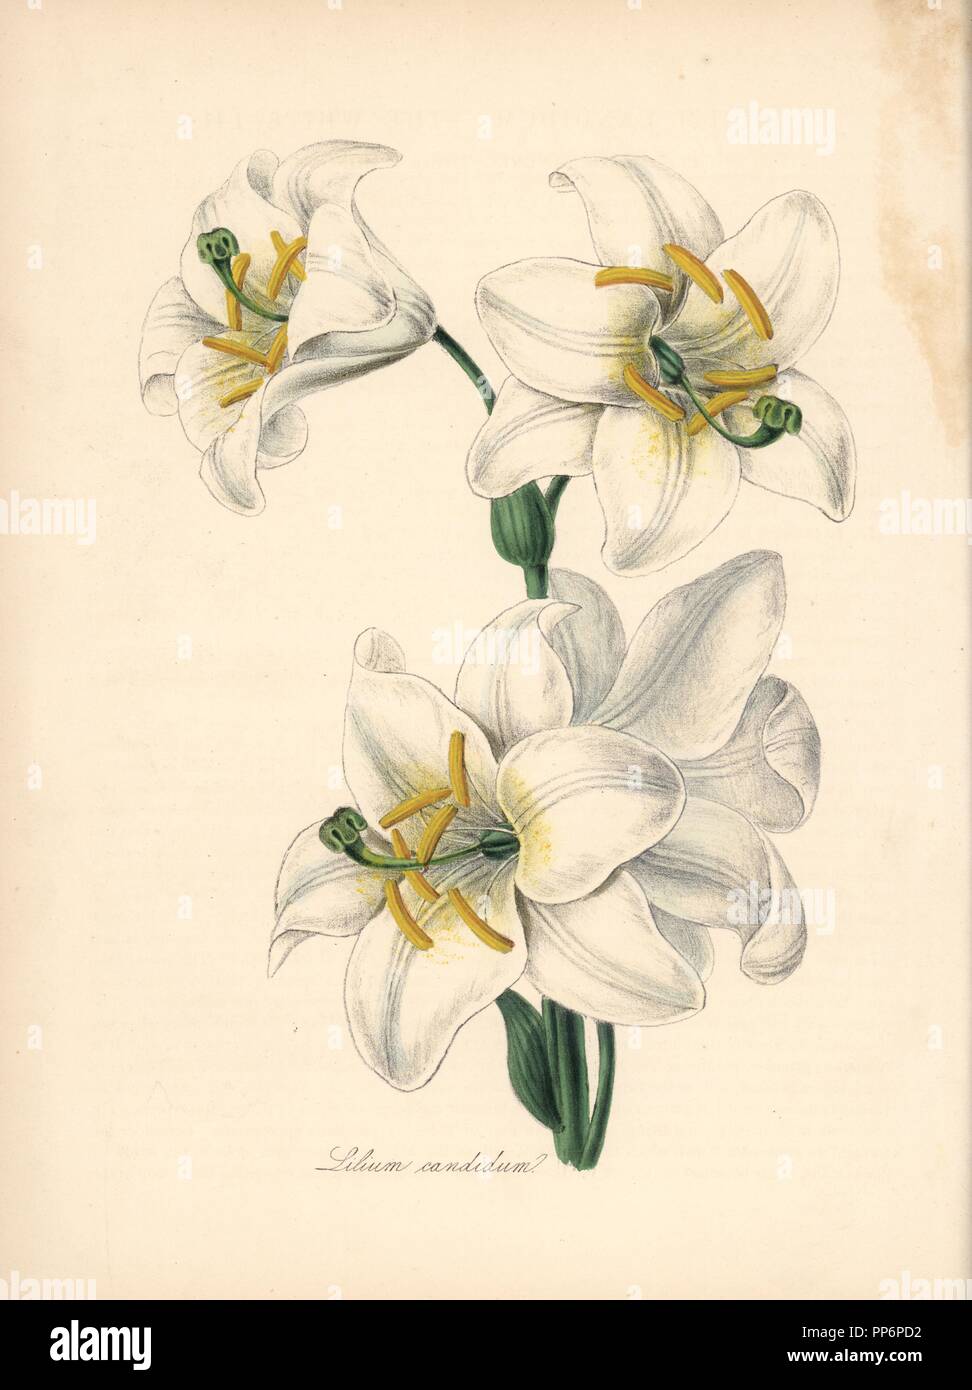 Madonna lily, Lilium candidum. Handcoloured zincograph by C. Chabot drawn by Miss M. A. Burnett from her 'Plantae Utiliores: or Illustrations of Useful Plants,' Whittaker, London, 1842. Miss Burnett drew the botanical illustrations, but the text was chiefly by her late brother, British botanist Gilbert Thomas Burnett (1800-1835). Stock Photo